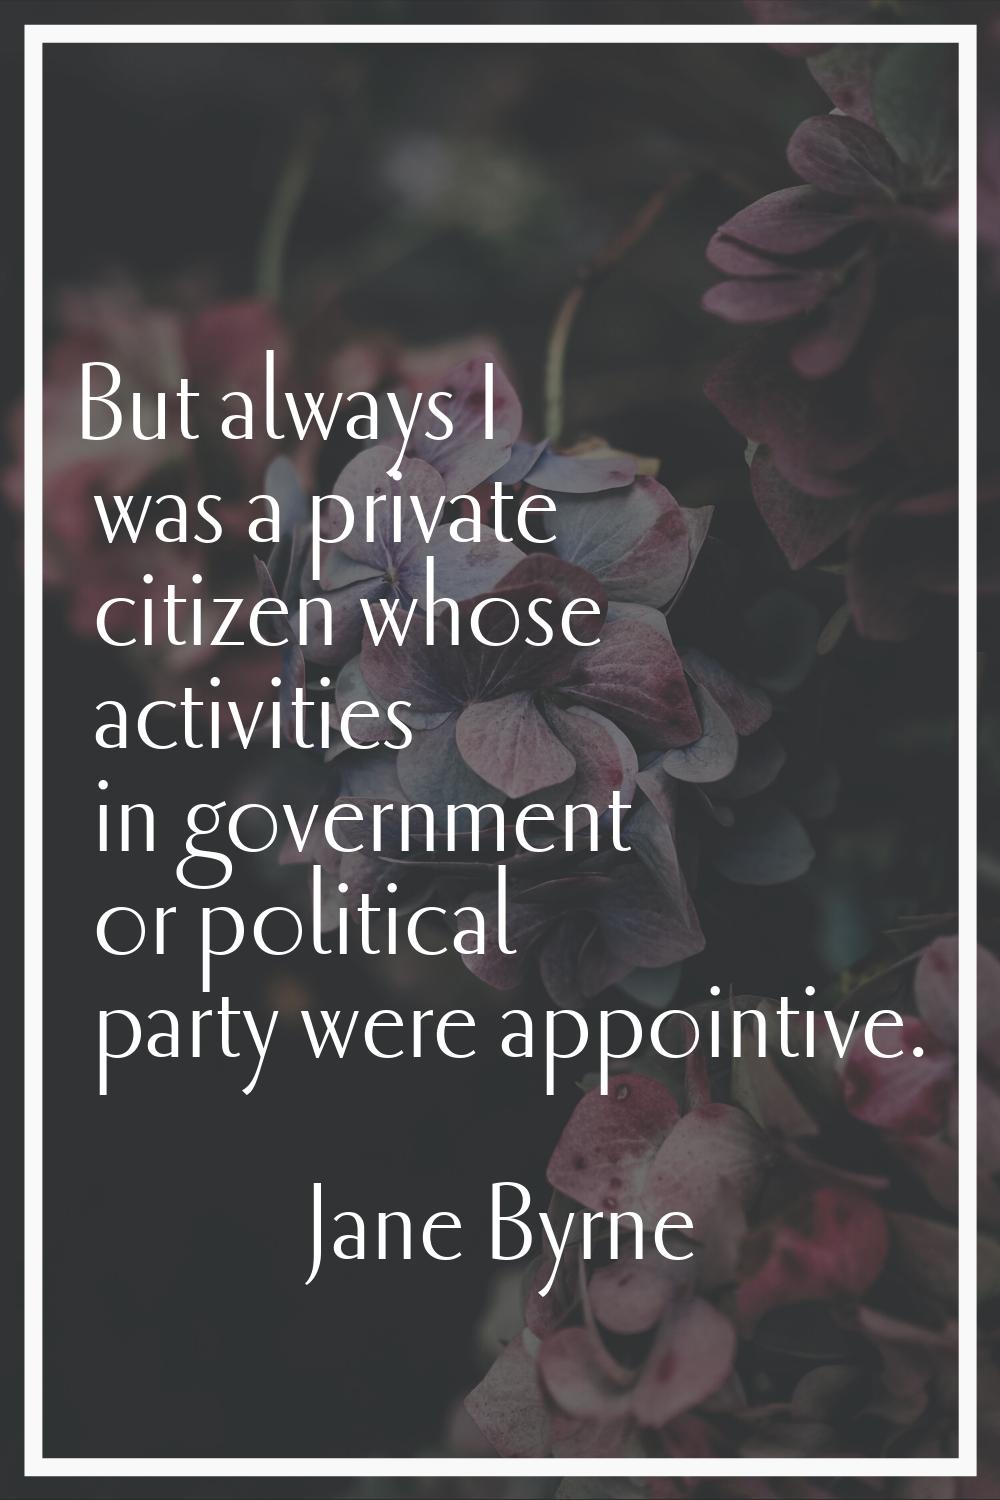 But always I was a private citizen whose activities in government or political party were appointiv